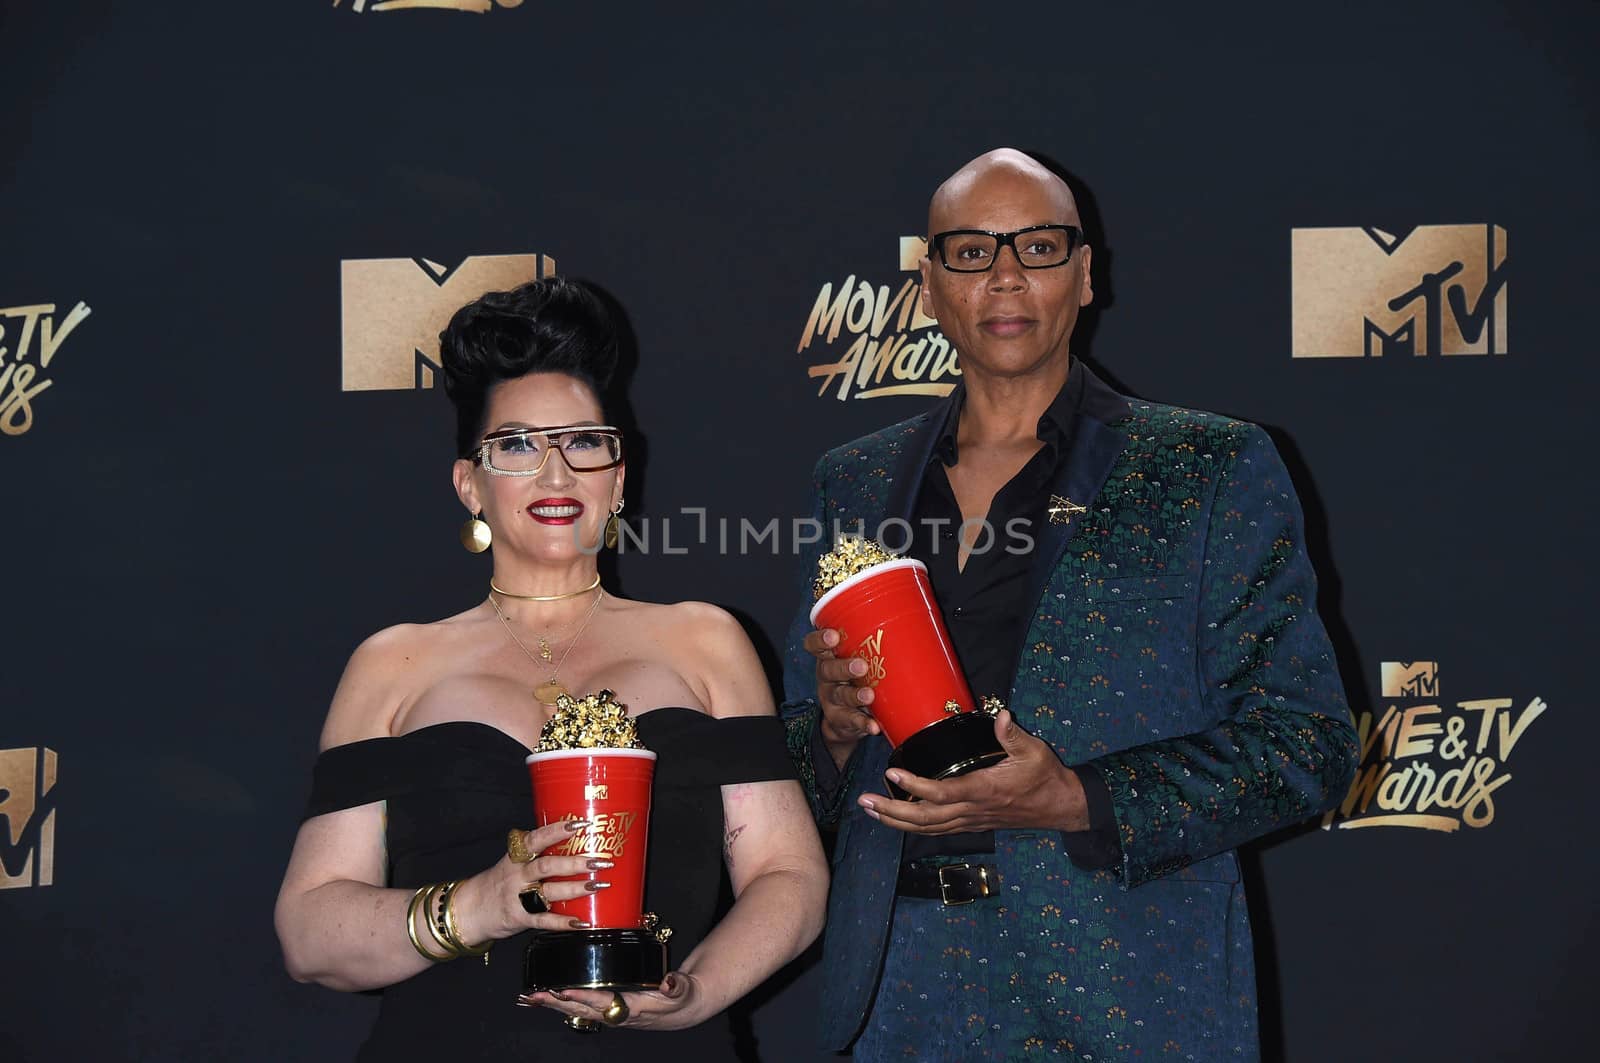 RuPaul, Michelle Visage at the 2017 MTV Movie & TV Awards, Press Room, Shrine Auditorium, Los Angeles, CA 05-07-17/ImageCollect by ImageCollect